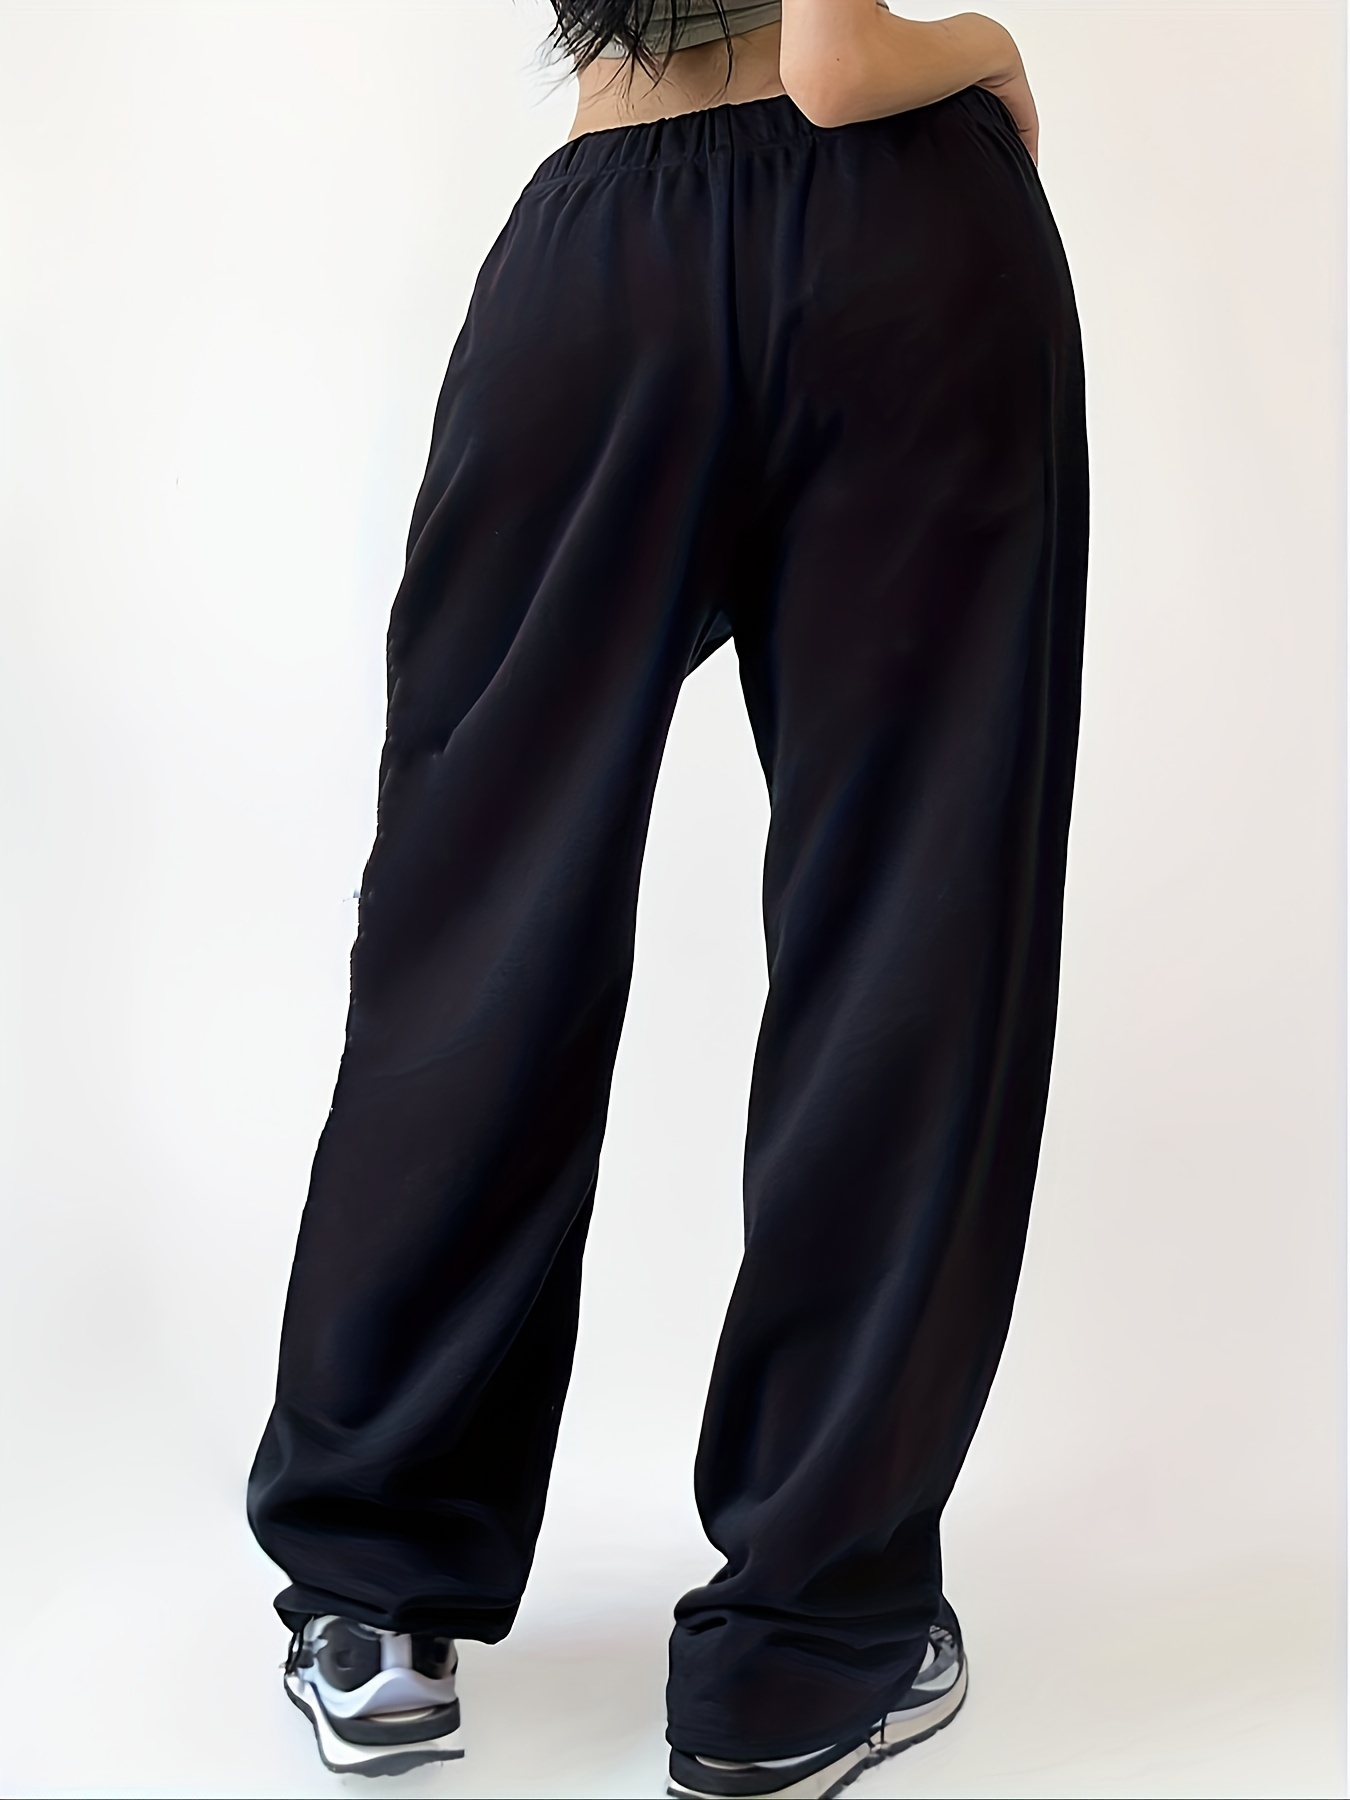 Women Tapered Trousers Tie Elastic Waist Soft Comfy Sports Pants